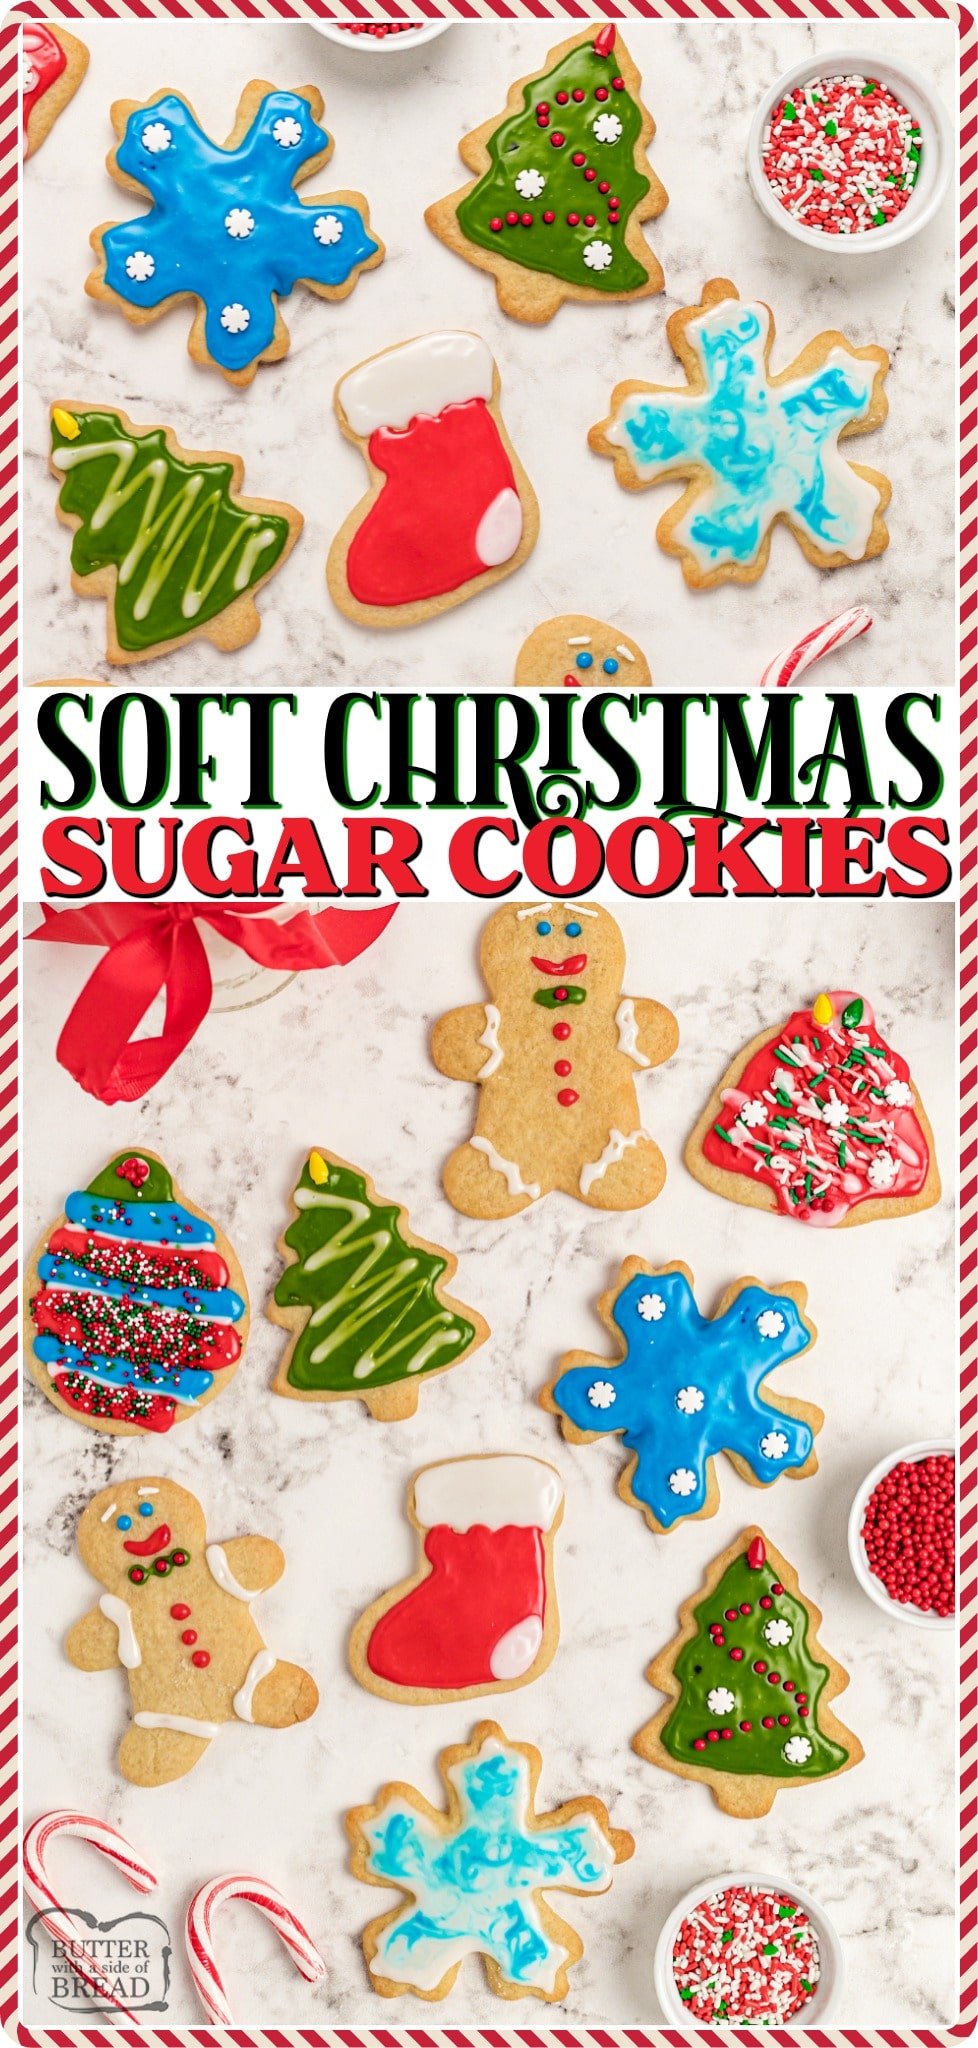 Soft Christmas Sugar Cookies made with classic ingredients & frosted with a simple Royal icing. Perfect holiday Sugar Cookie recipe for festive Christmas cut out cookies!